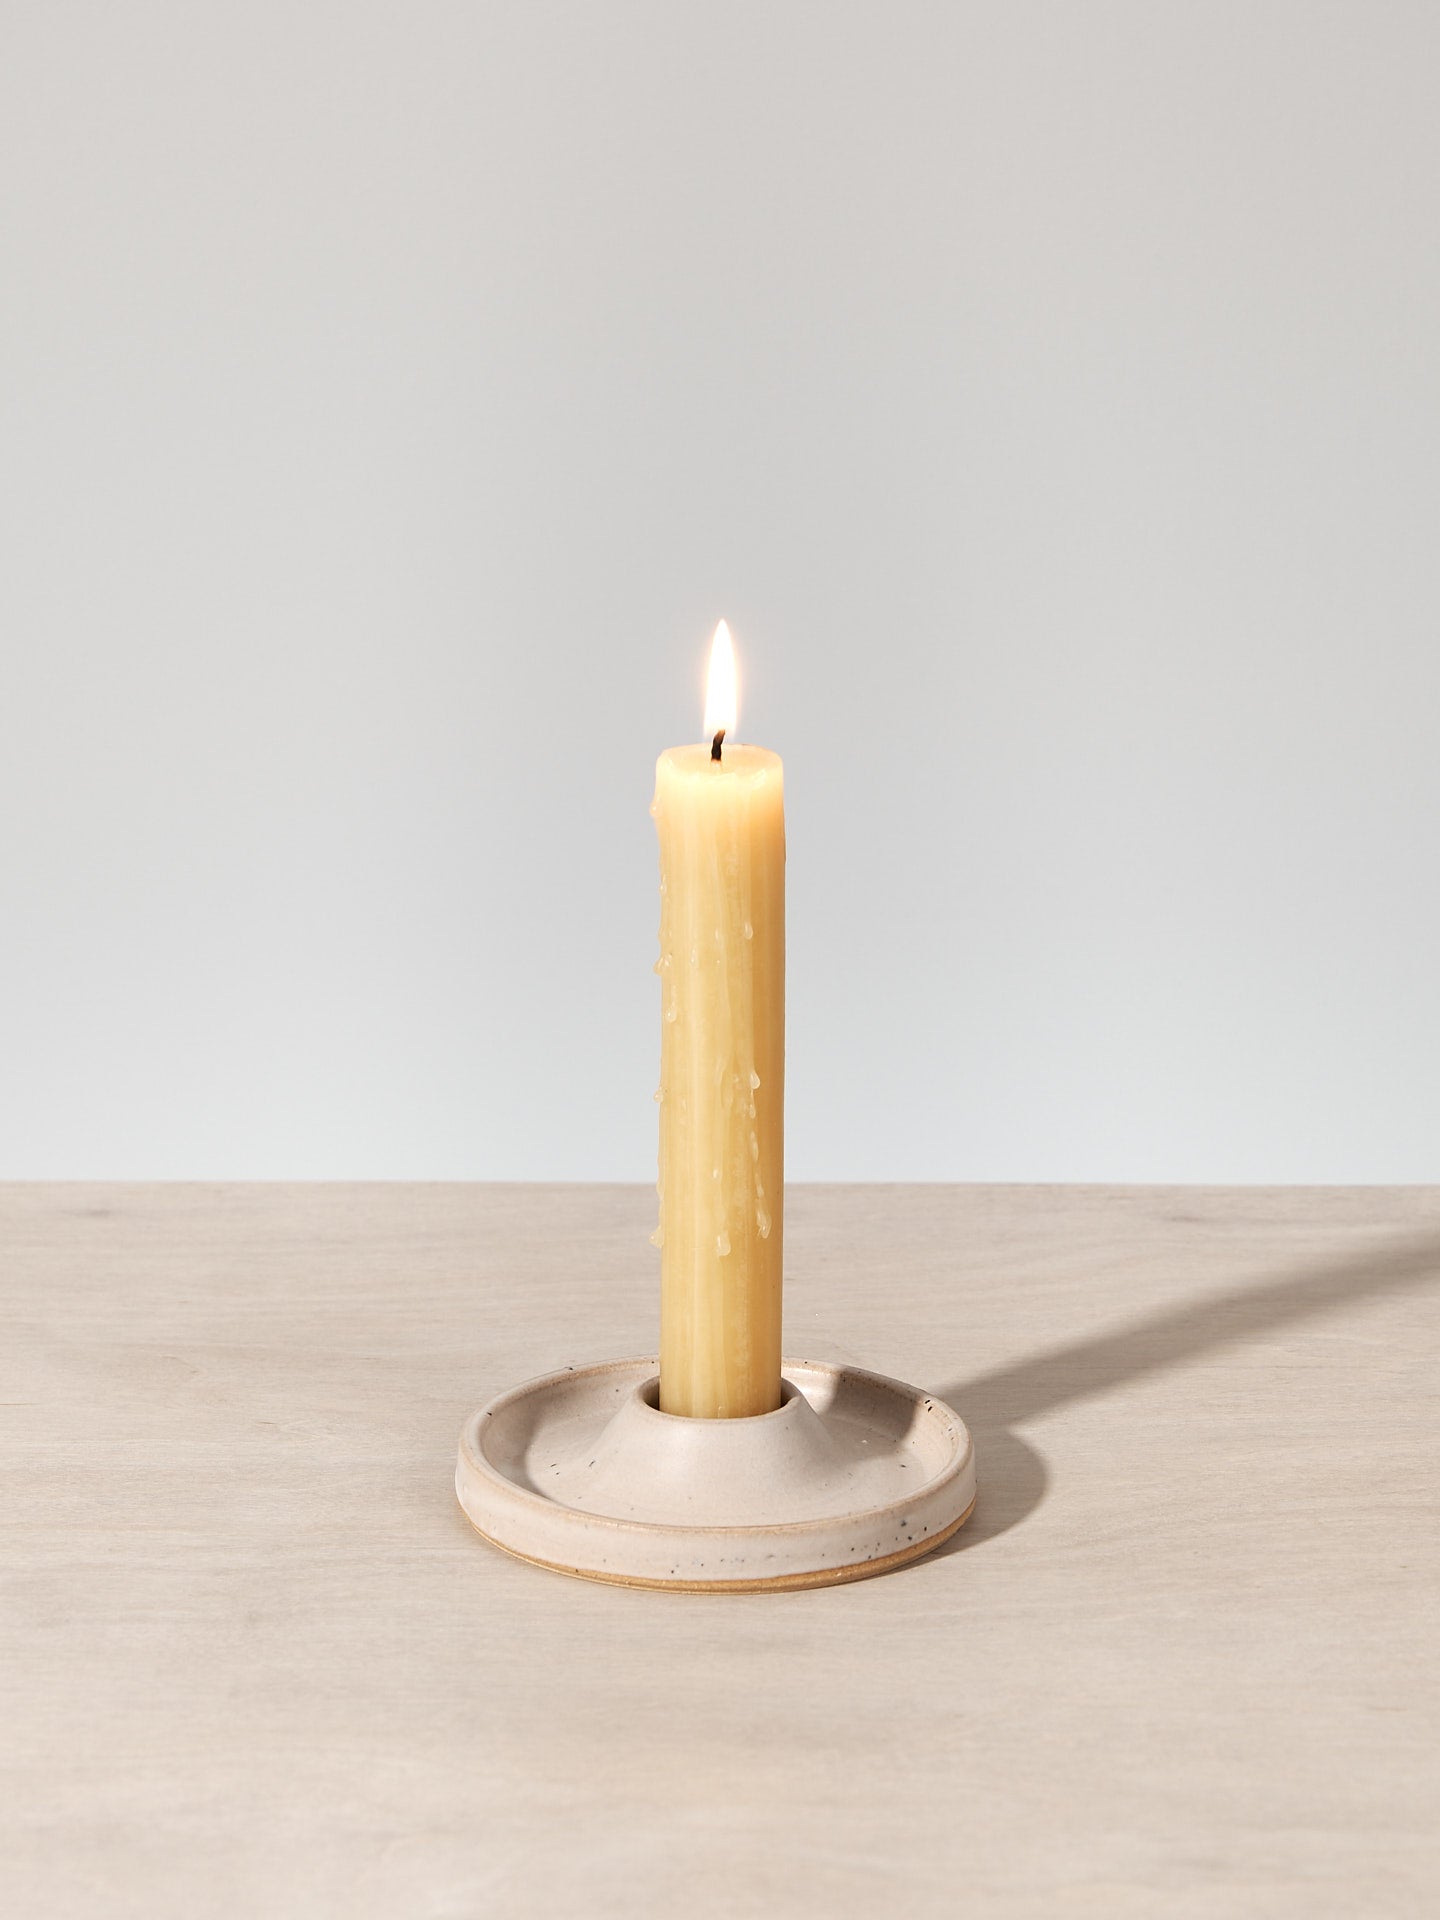 A Candle Holder - Cloud by deborah sweeney is sitting on top of a wooden table.